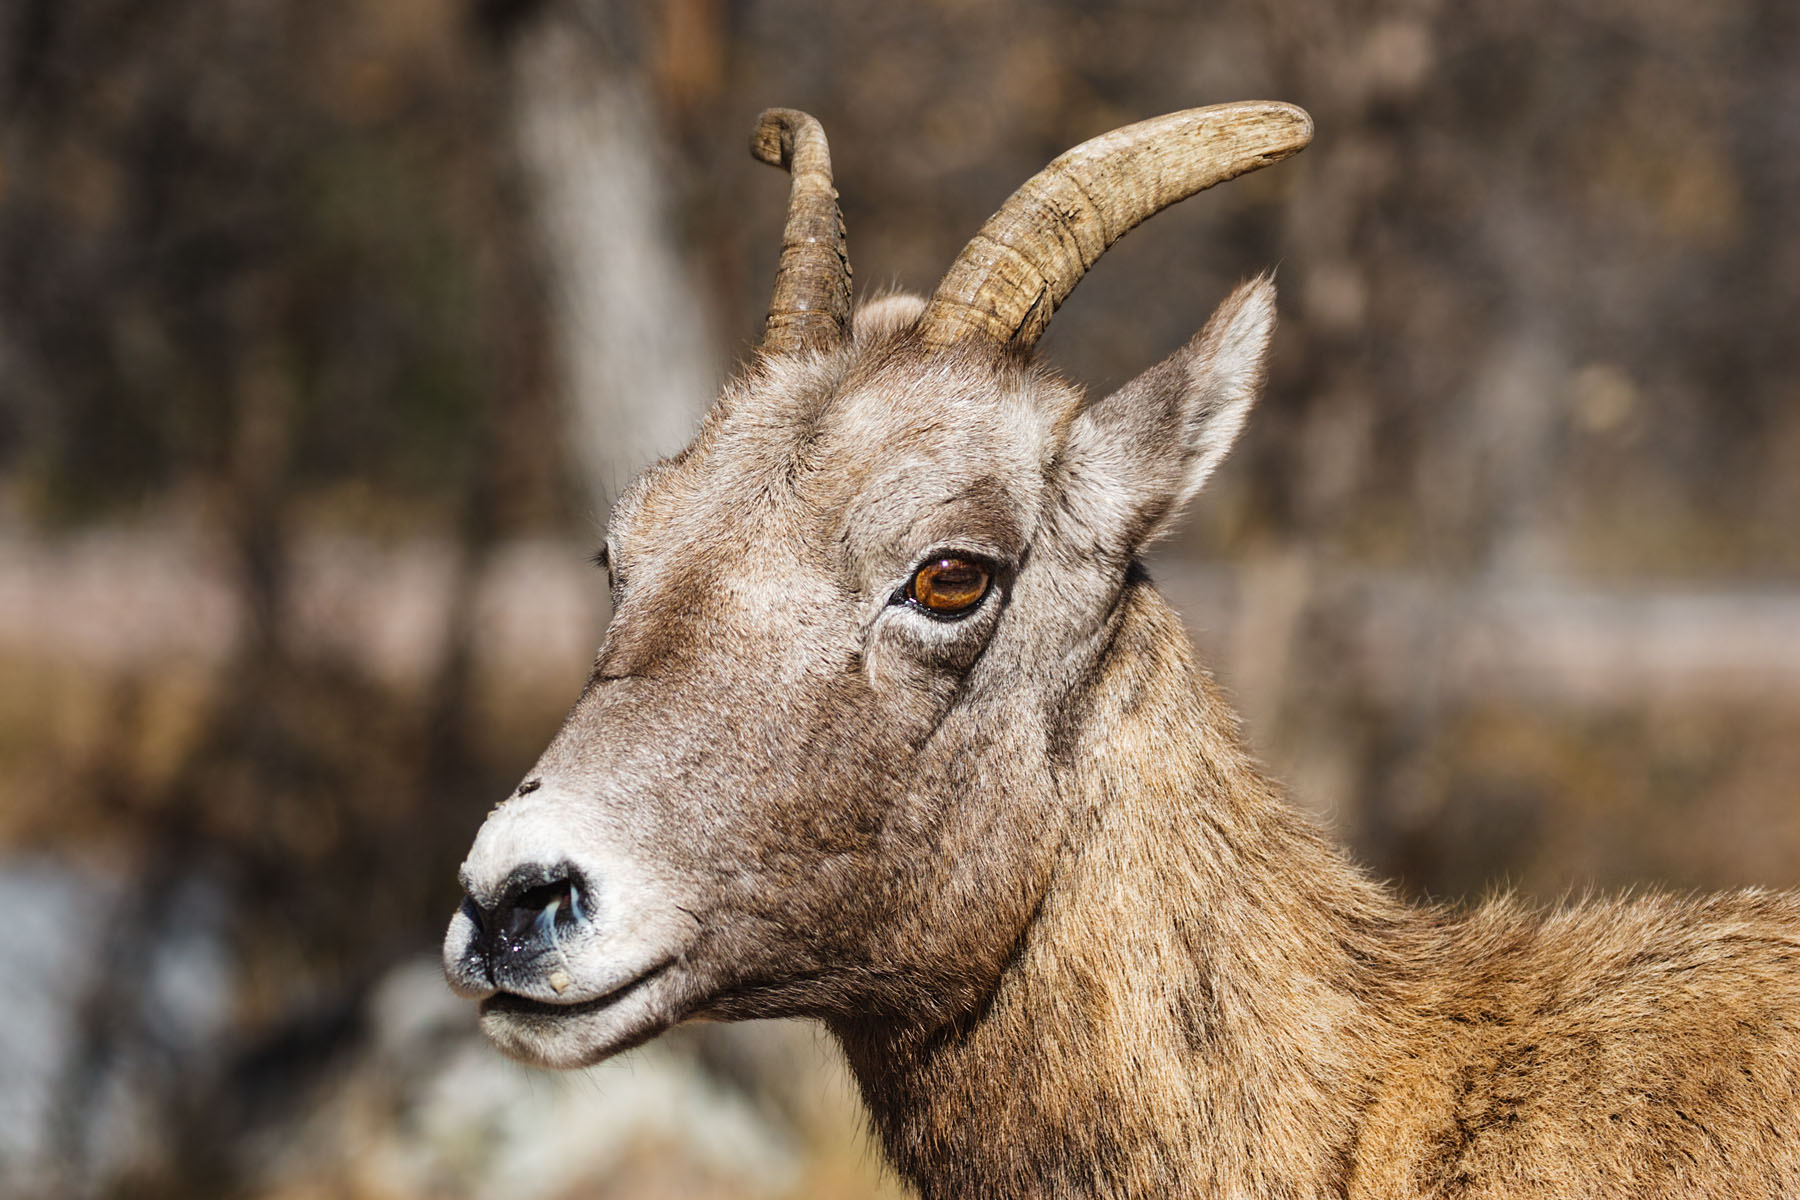 Rocky Mountain Bighorn ewe, Custer State Park, SD.  Click for next photo.